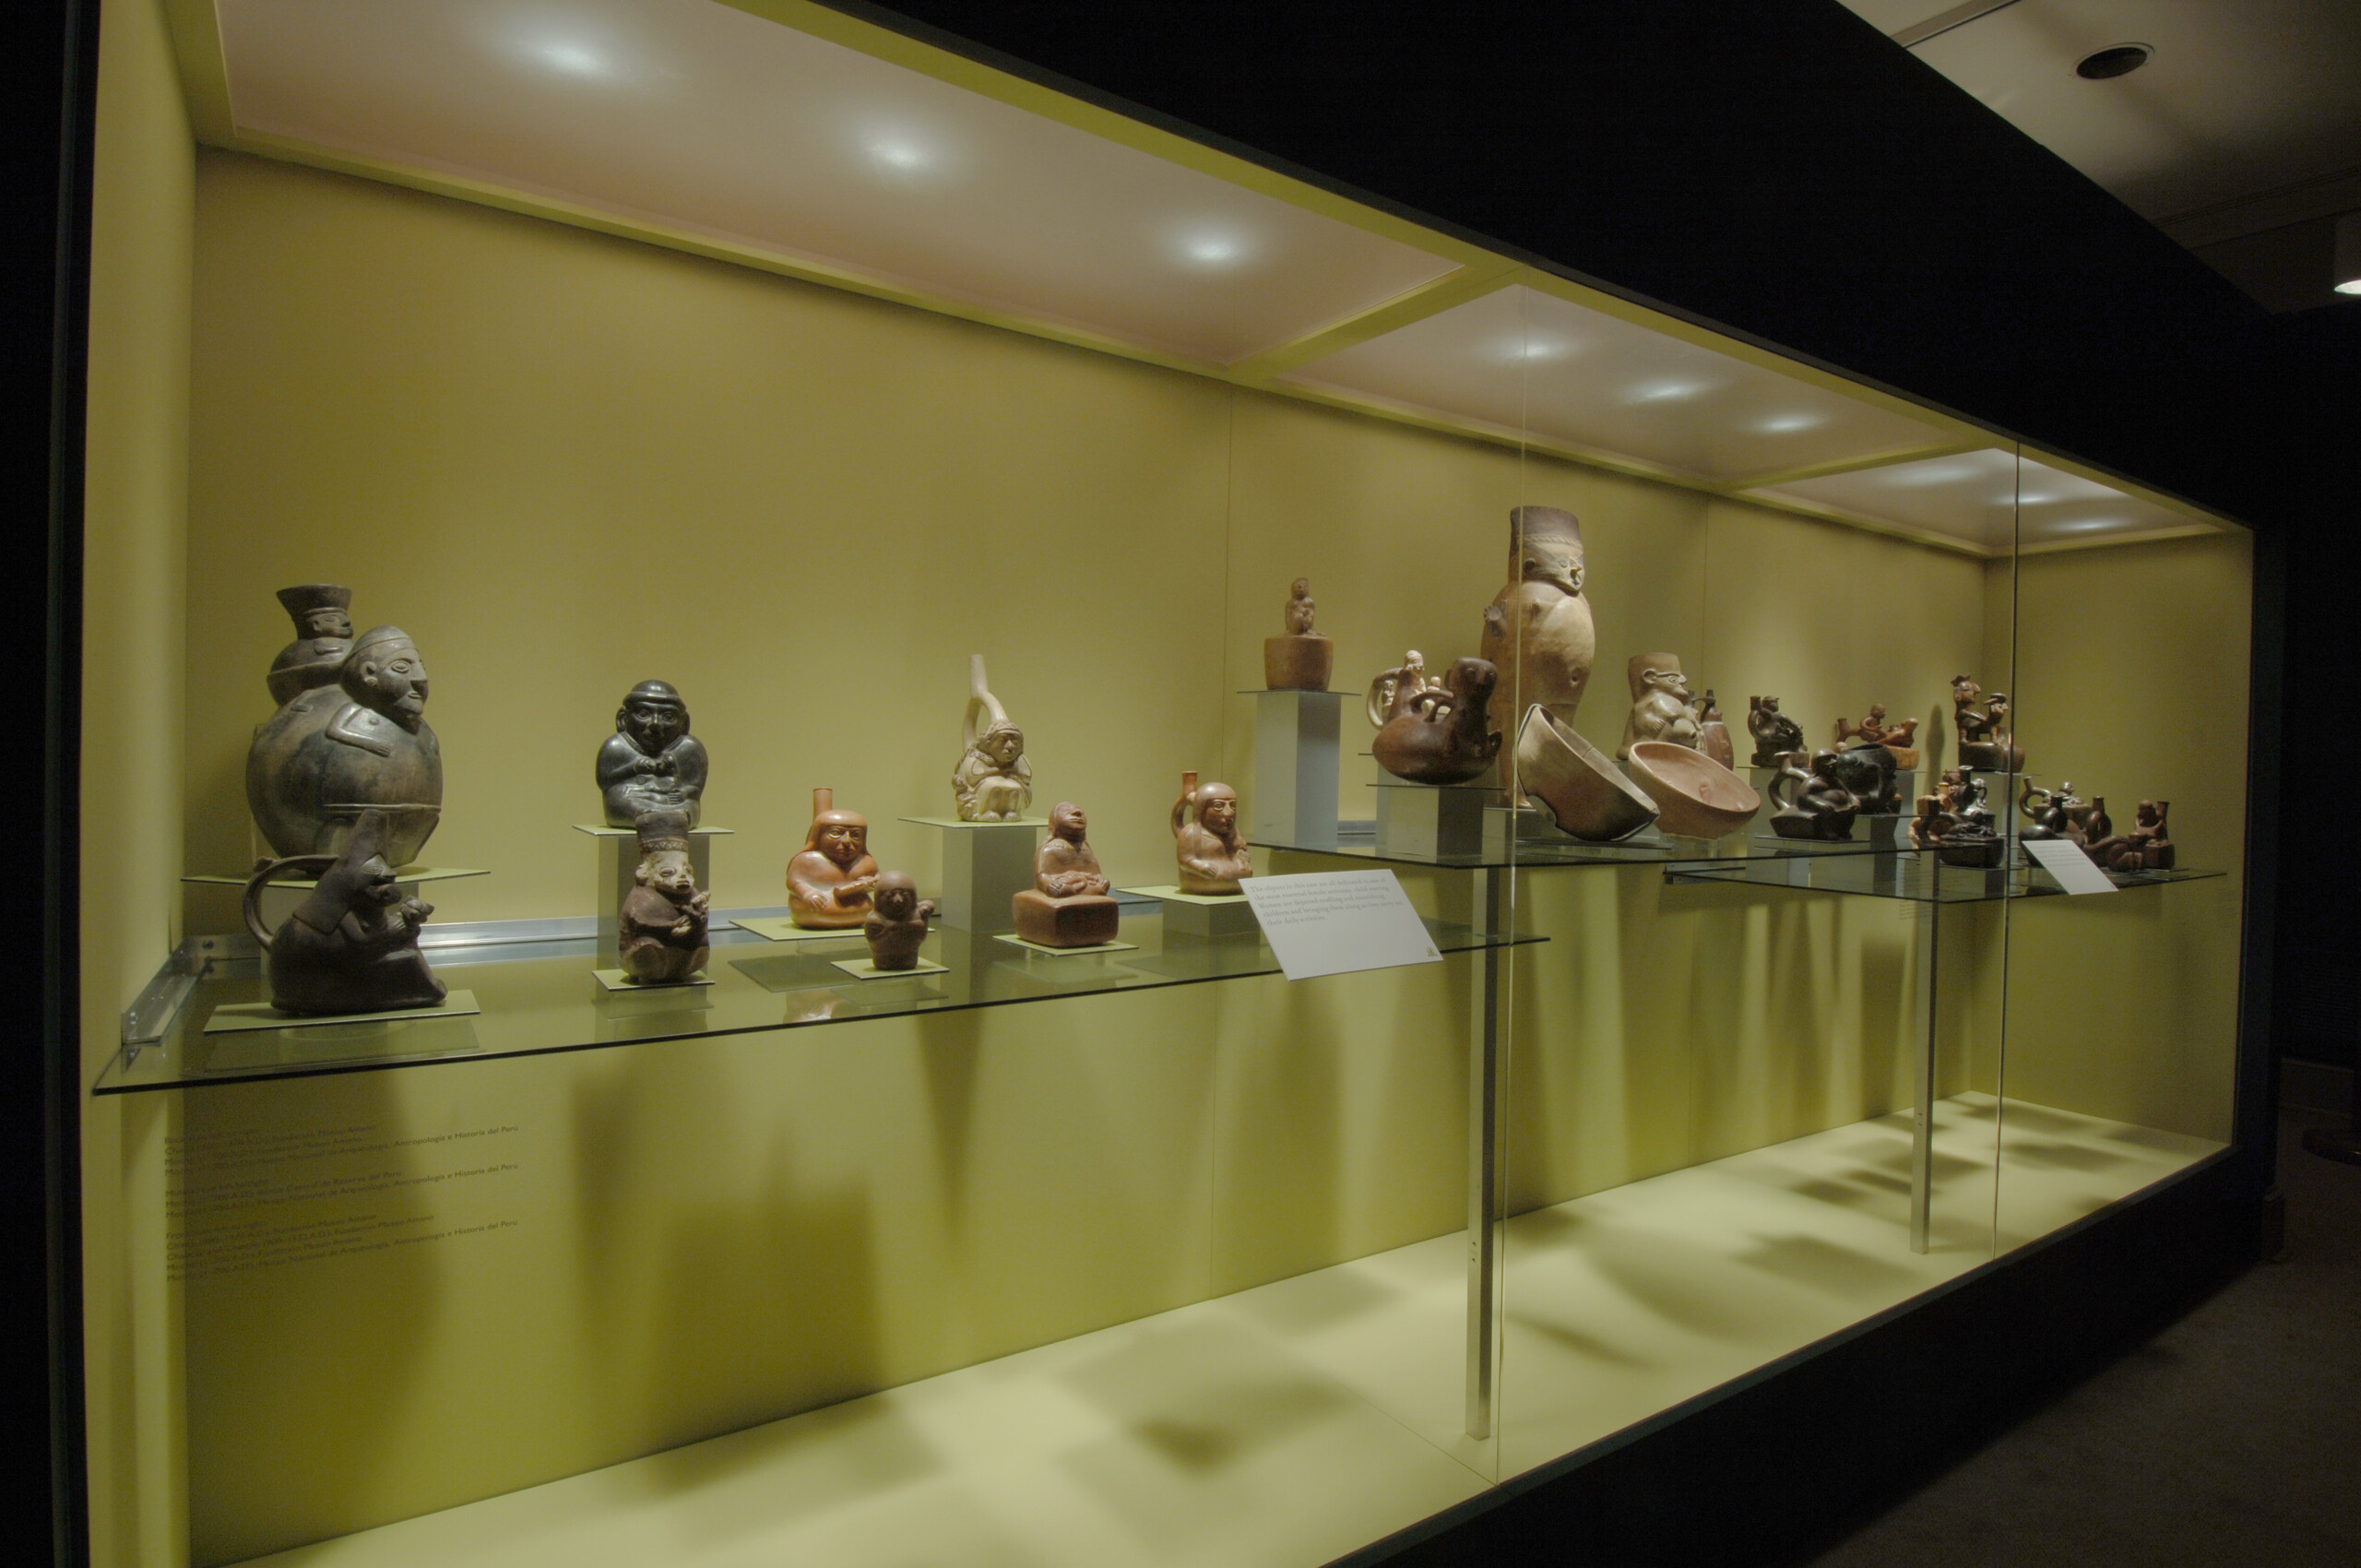 A view of a glass cabinet with little ancient clay sculptures inside. The cabinet is painted inside in a green color, which contrasts with the dark brown clay sculptures. The sculptures are of people, and there are also two bowls presented in the cabinet.